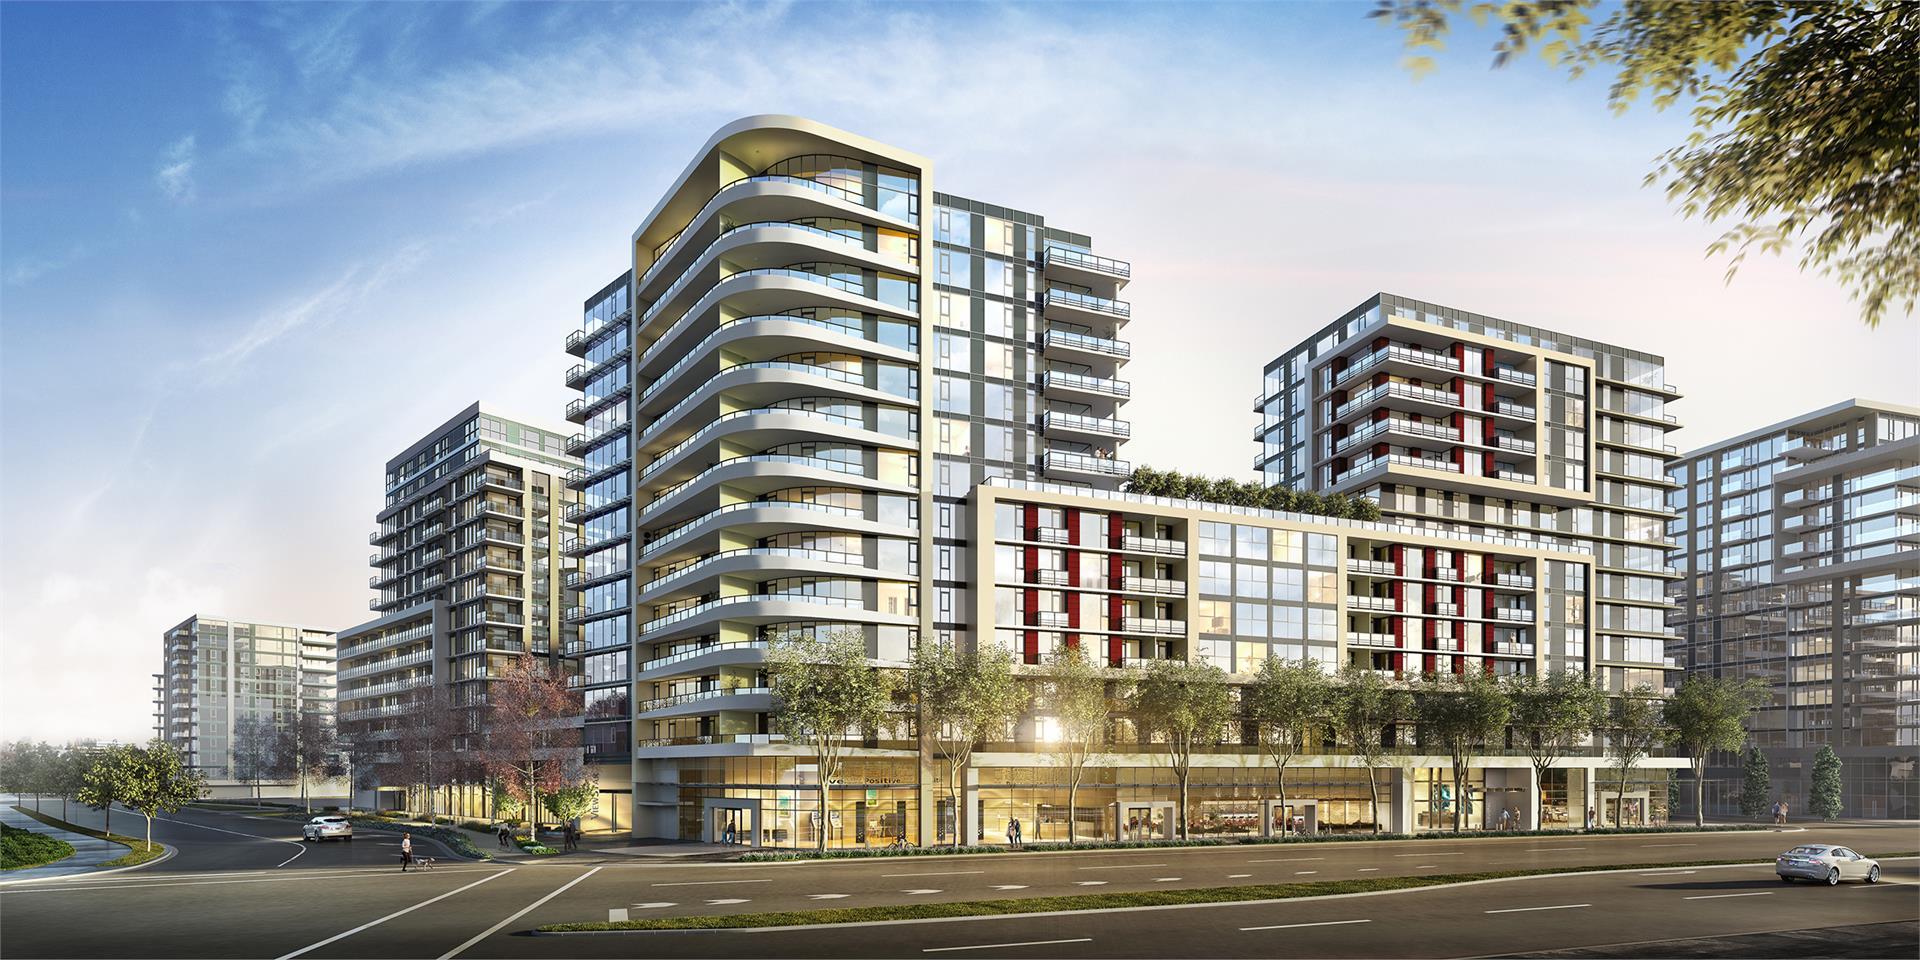 A riverside, mixed-use, master-planned community rising in Richmond's Capstan Village.